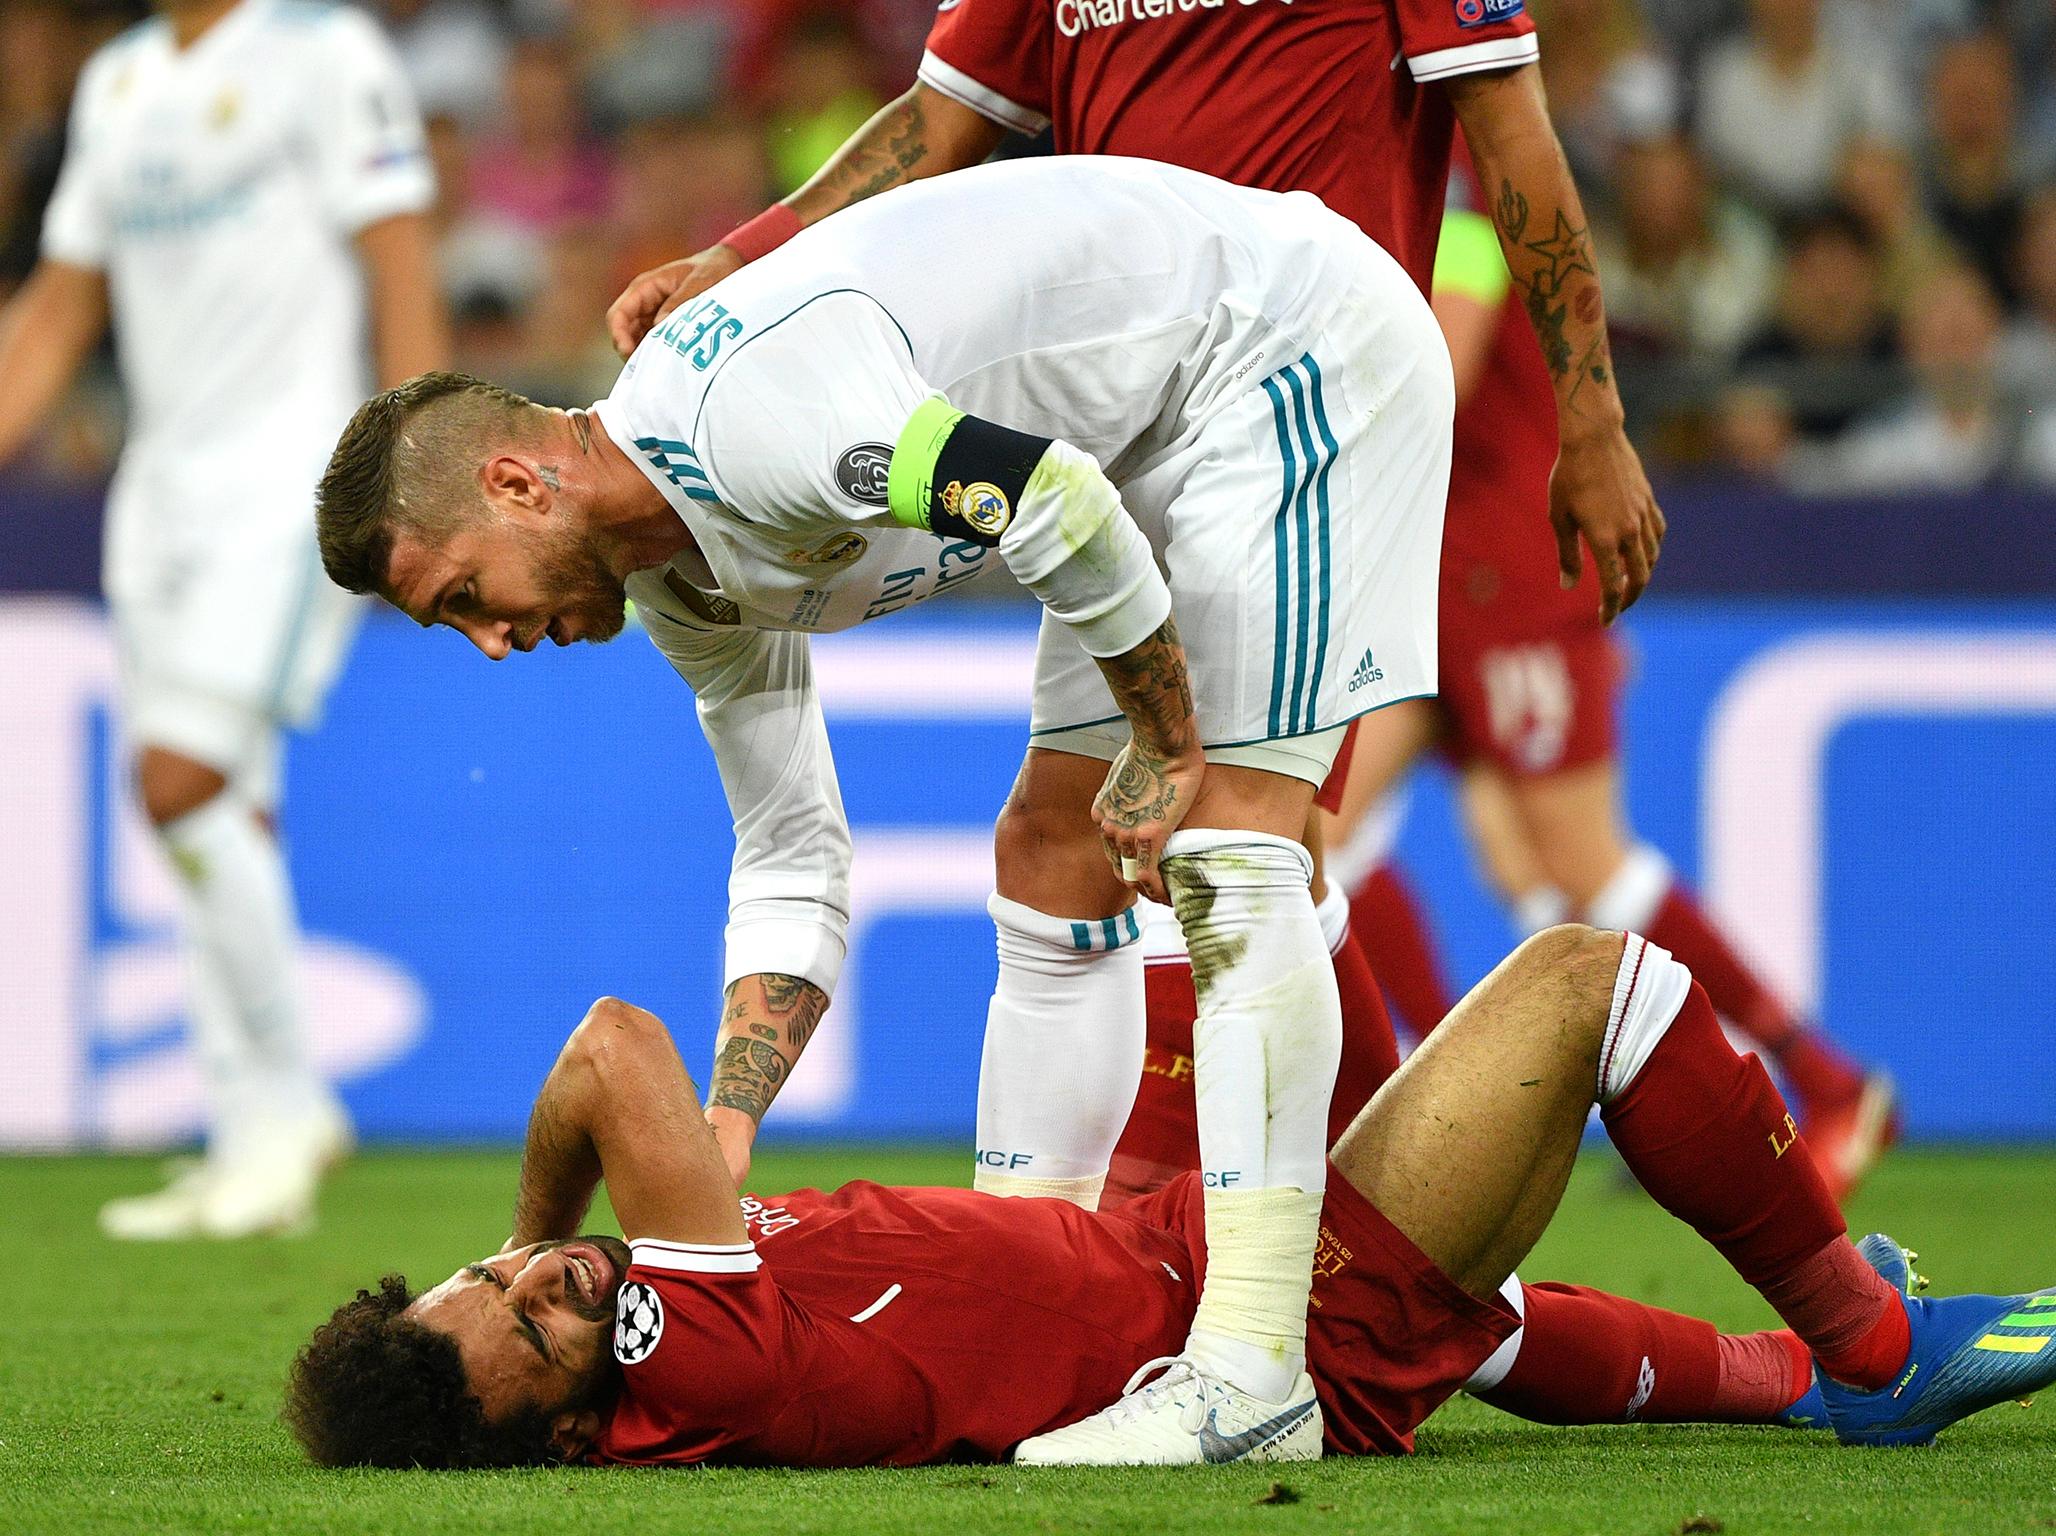 Klopp?describes Ramos as "ruthless and brutal"